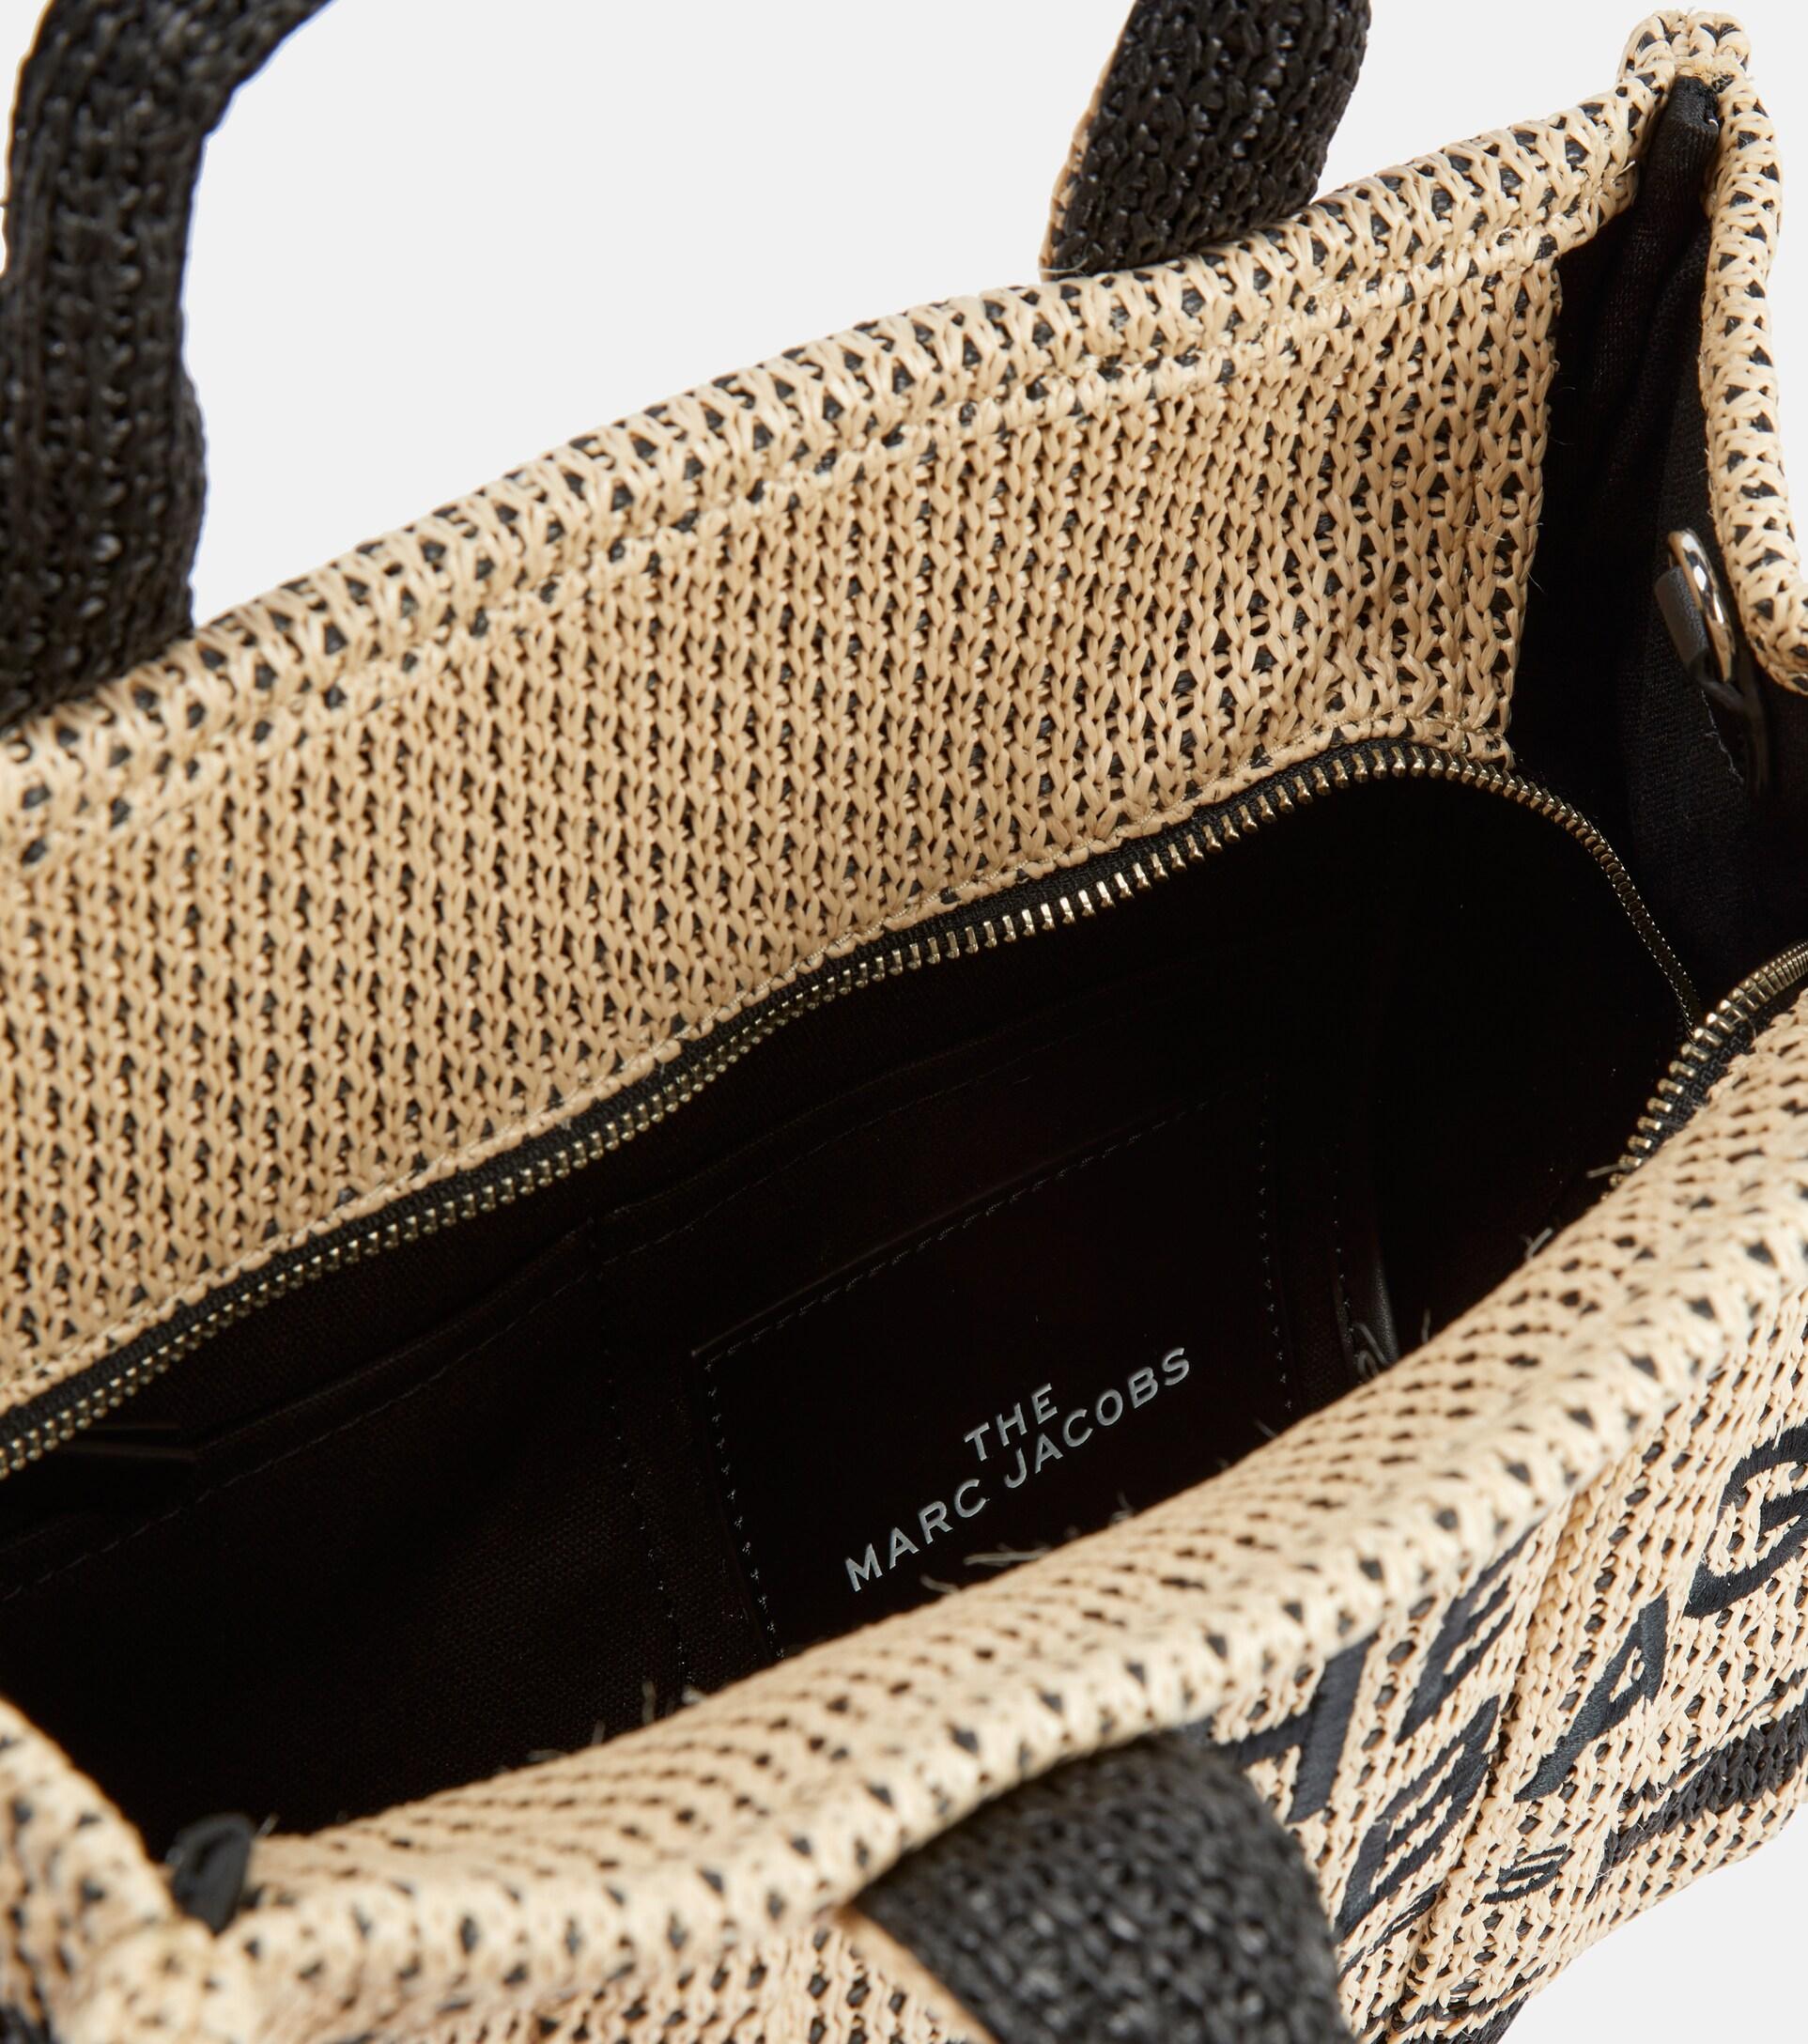 The Medium Woven Tote Bag in Beige - Marc Jacobs